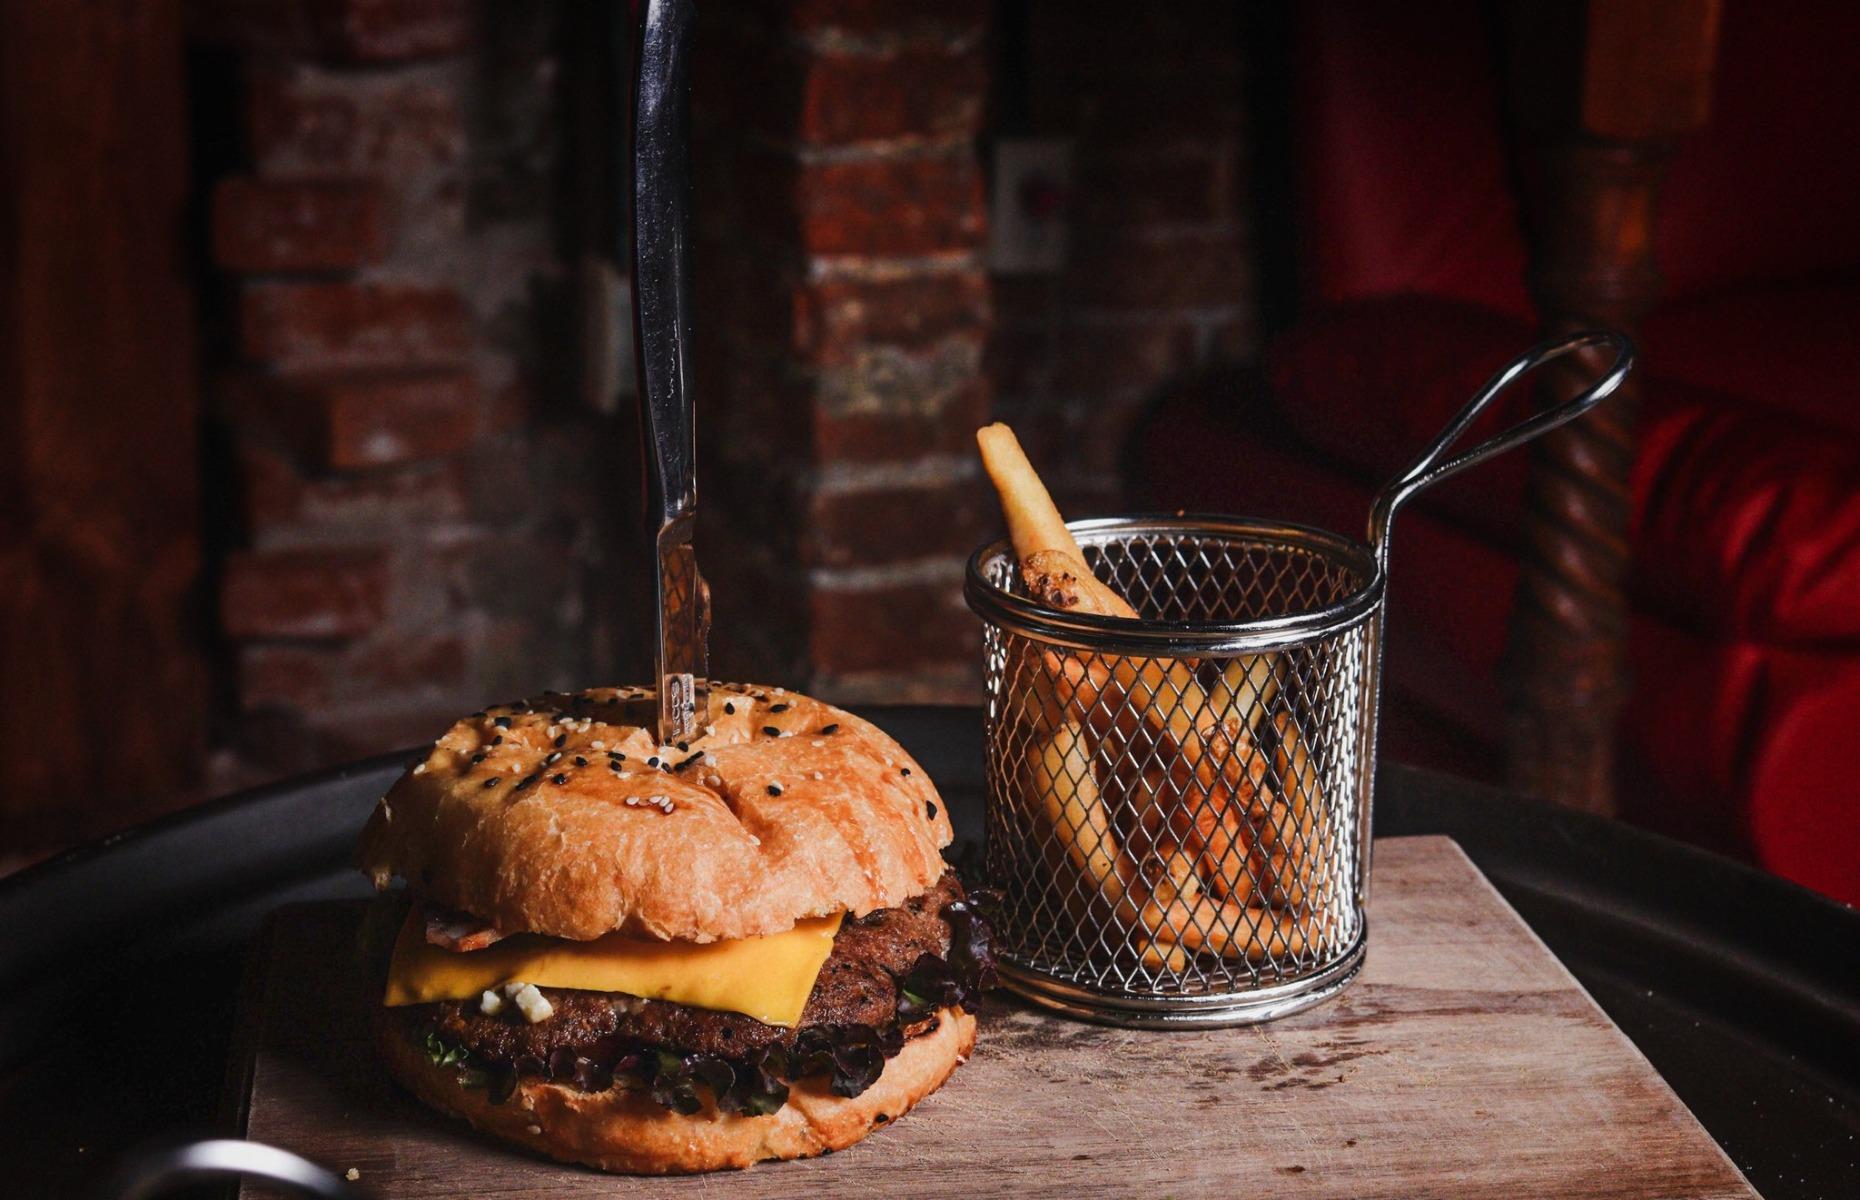 <p>The menu at <a href="https://www.elmesondelos3magos.com.mx/">El Mesón de los 3 Magos</a> in Mexico is packed with Potter-themed options, from drinks to desserts, as well as main meals. The (thankfully owl free) Hedwig Burger brings Potter fans a generous helping of grilled bison meat nestled in a fluffy brioche bun and topped with bacon, lettuce, tomato, Cheddar cheese and pickles. </p>